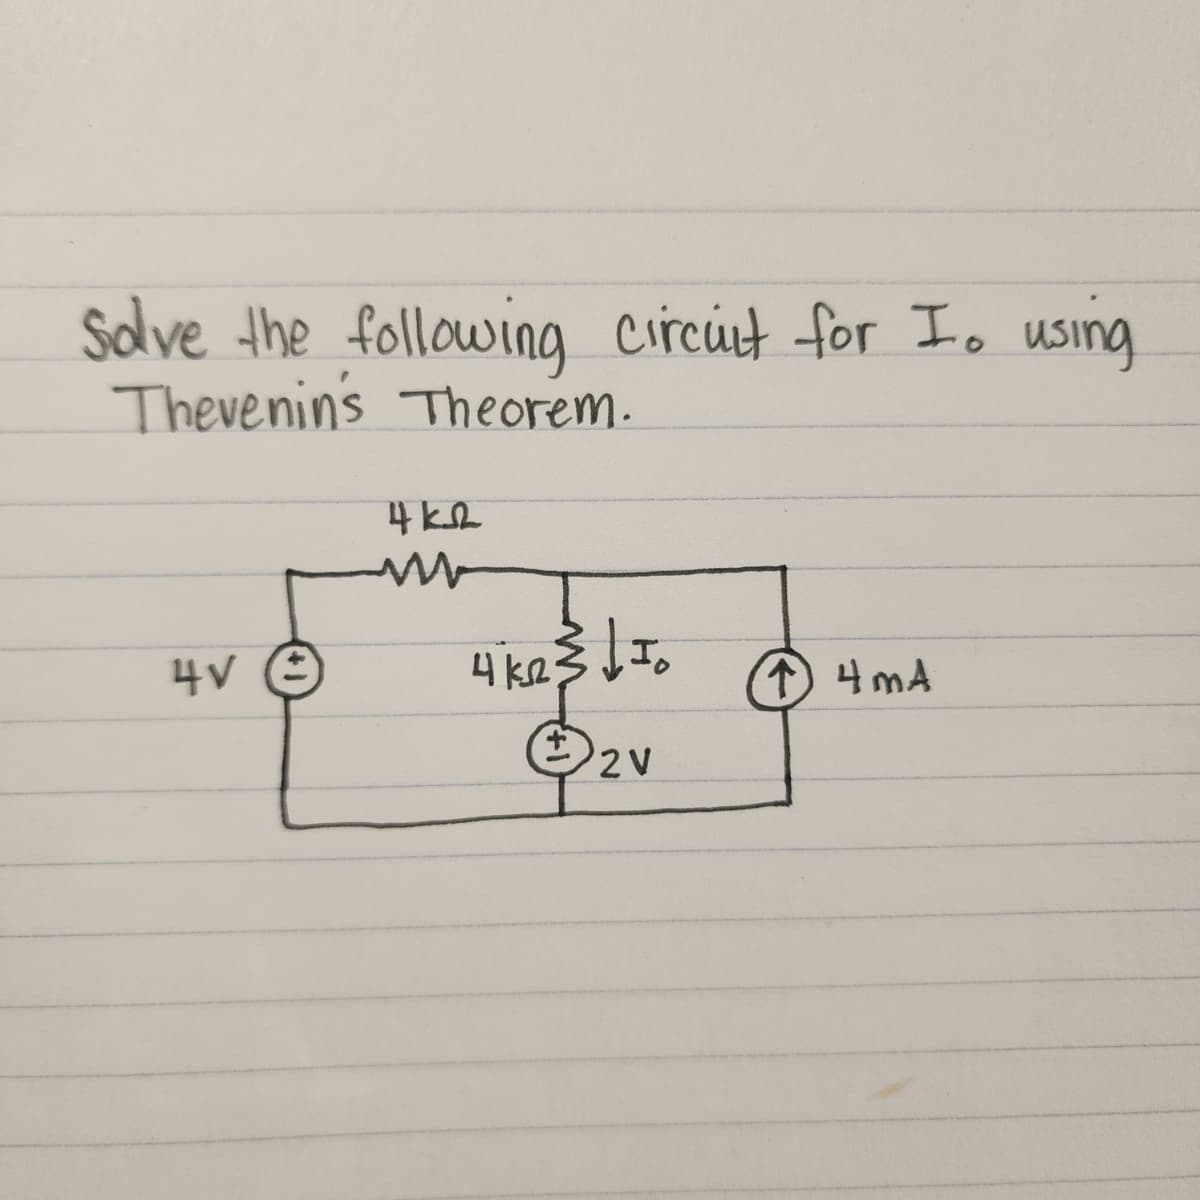 Solve the following circuit for I. using
Thevenin's Theorem.
4v ②
Η ΚΩ
ww
4k2
↑ 4 mA.
2V